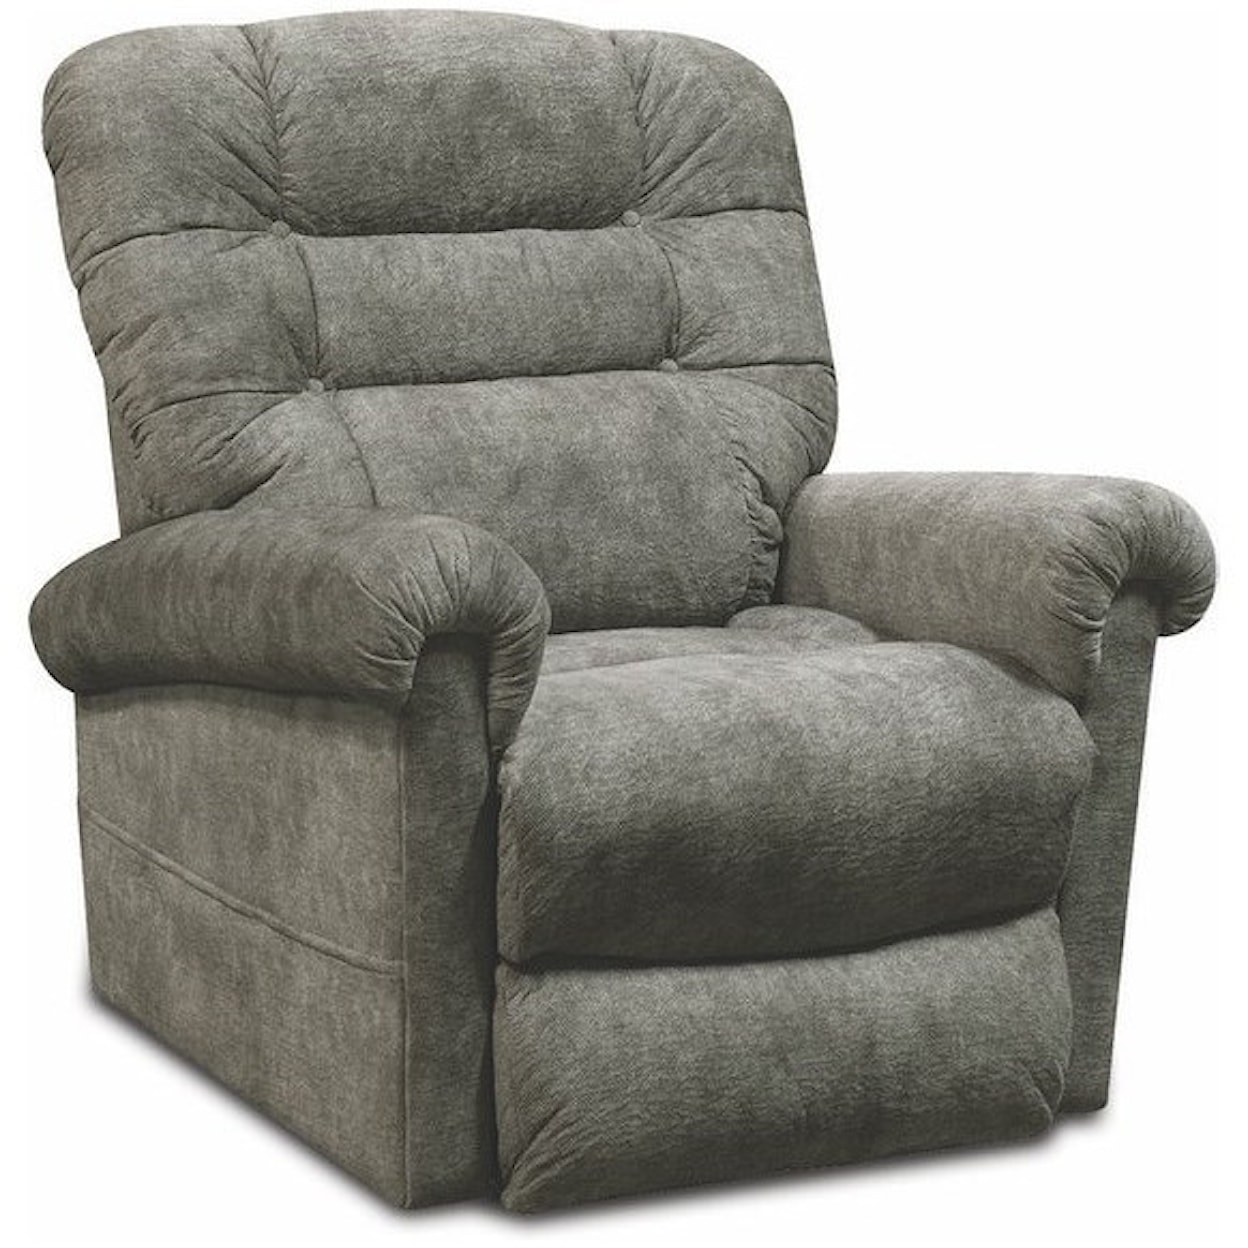 Tennessee Custom Upholstery EZ7A00 Reclining Lift Chair